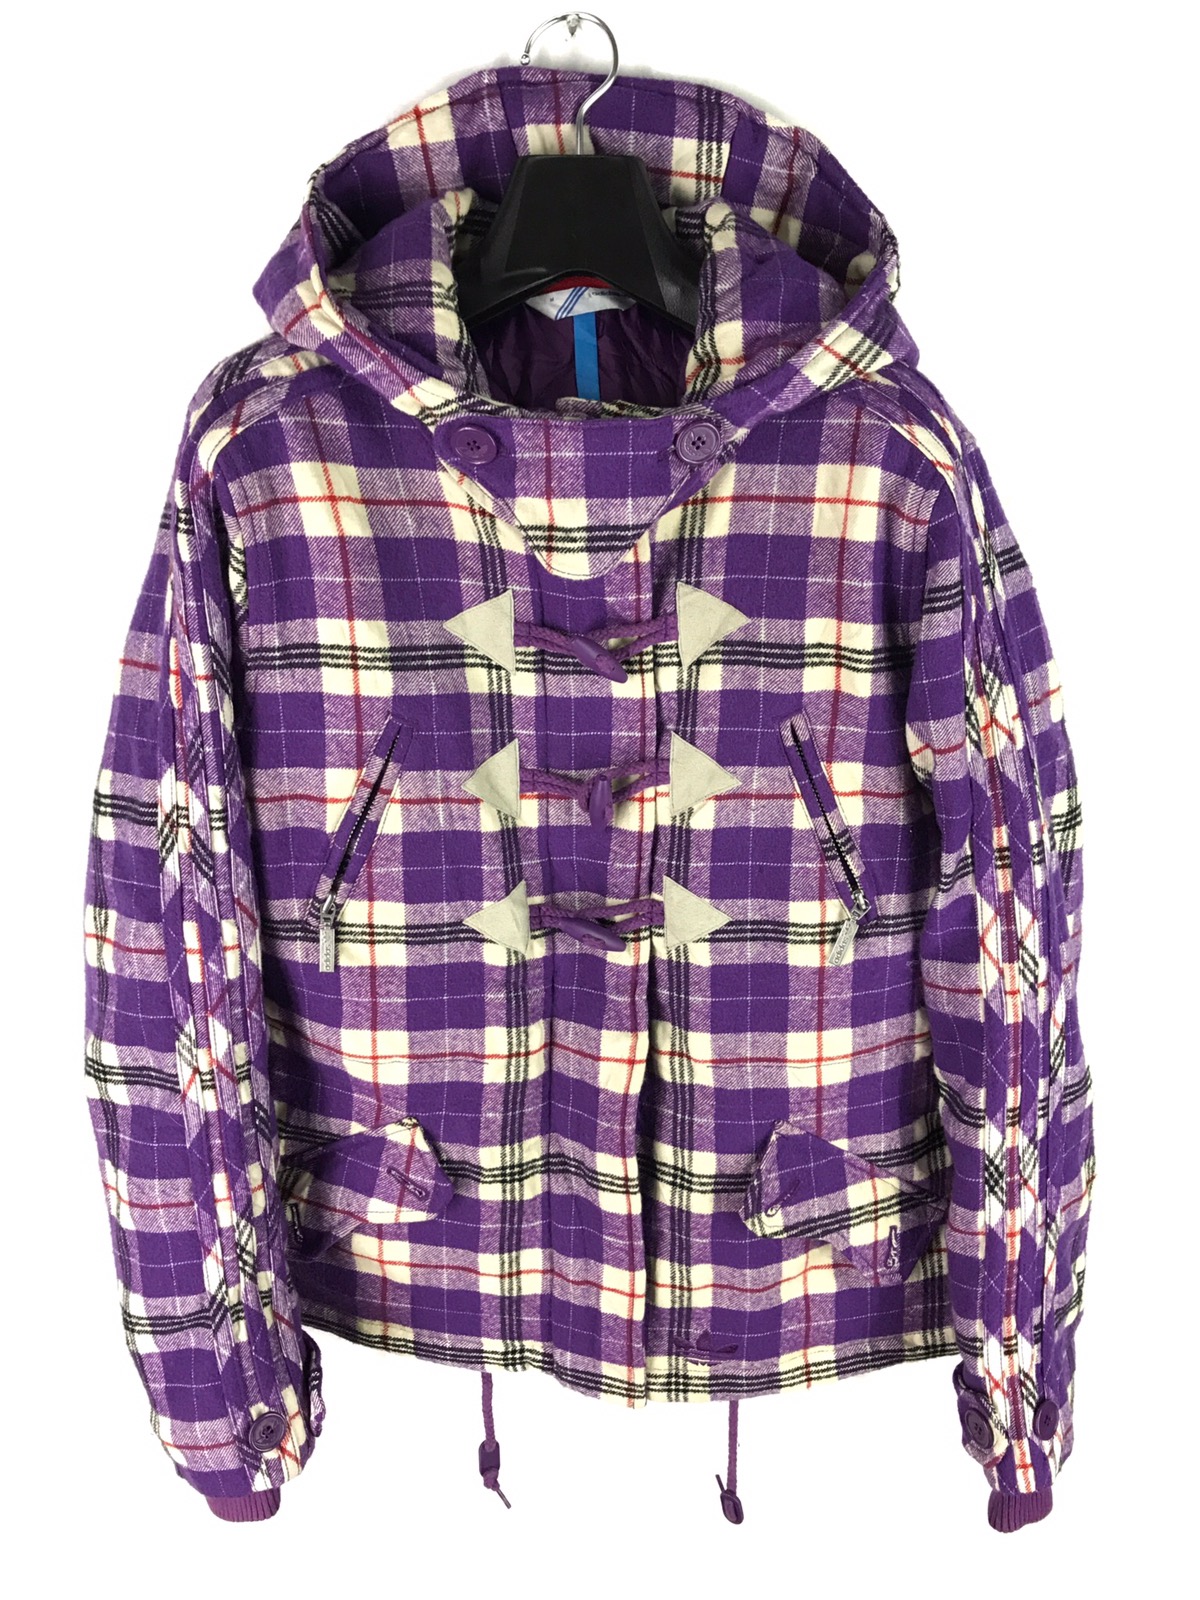 ADIDAS Plaid Checked Outerwear Duffle Coat Hoodie - 1